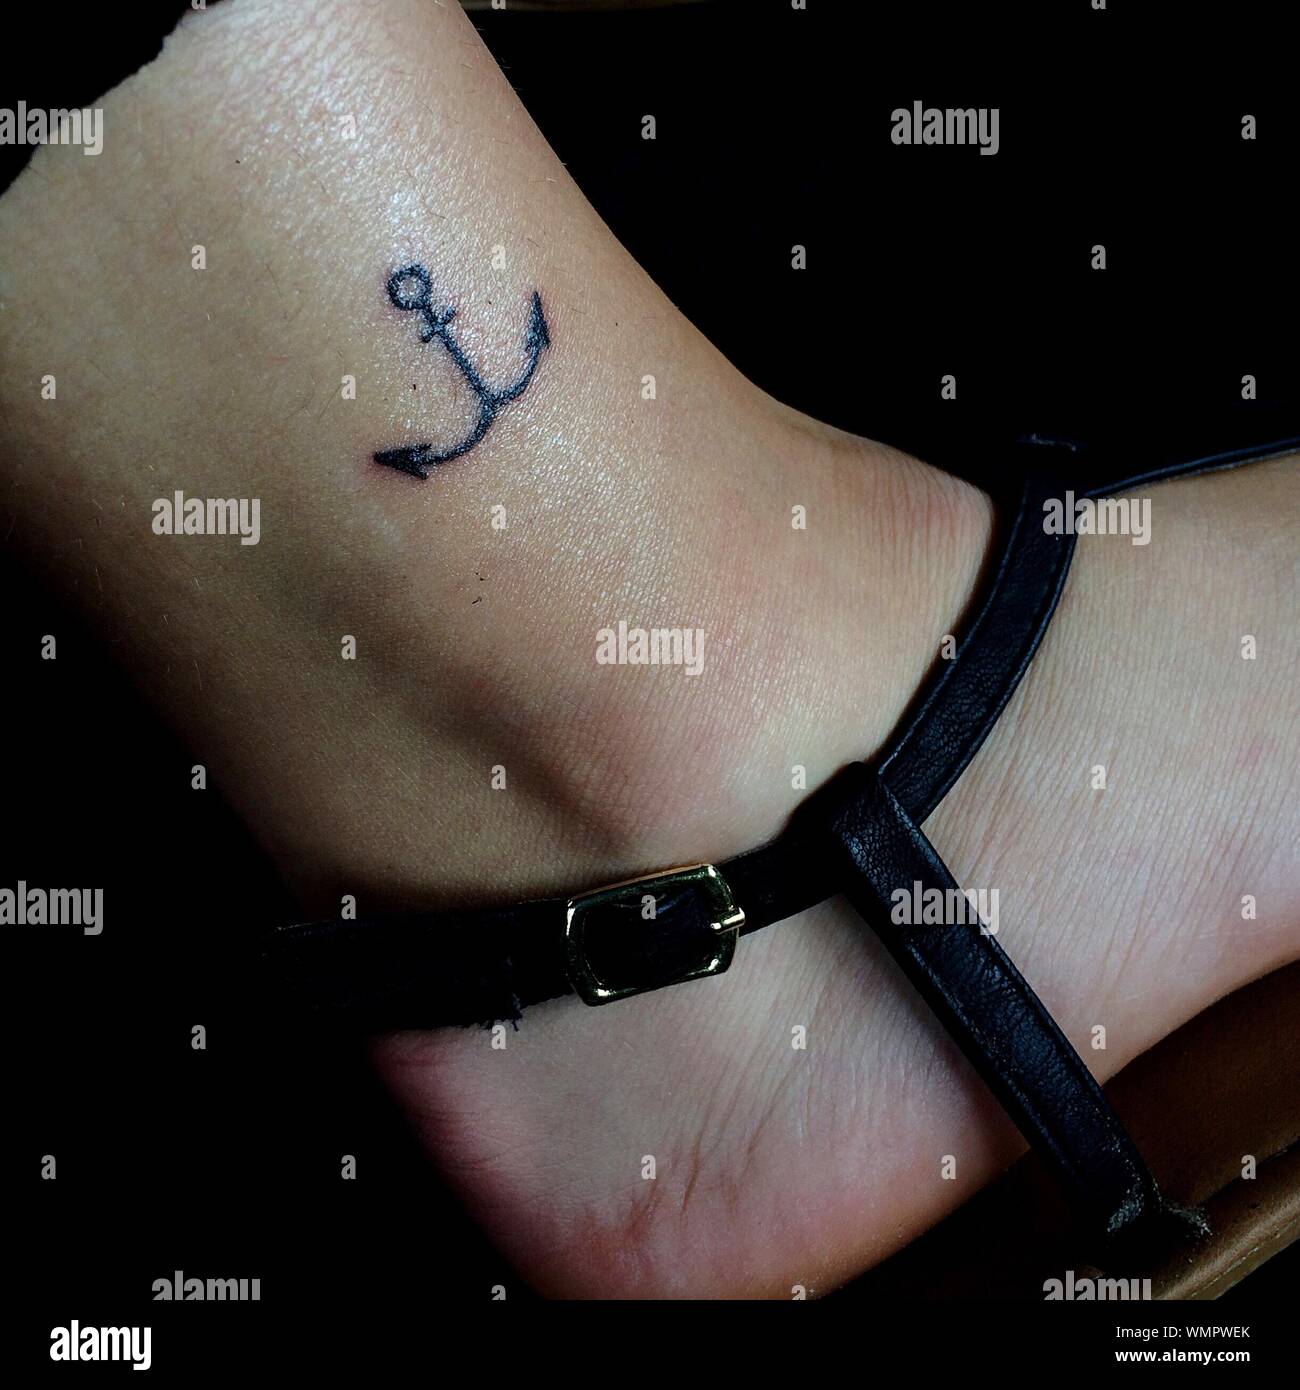 61 Pirate Anchor Tattoos Collection